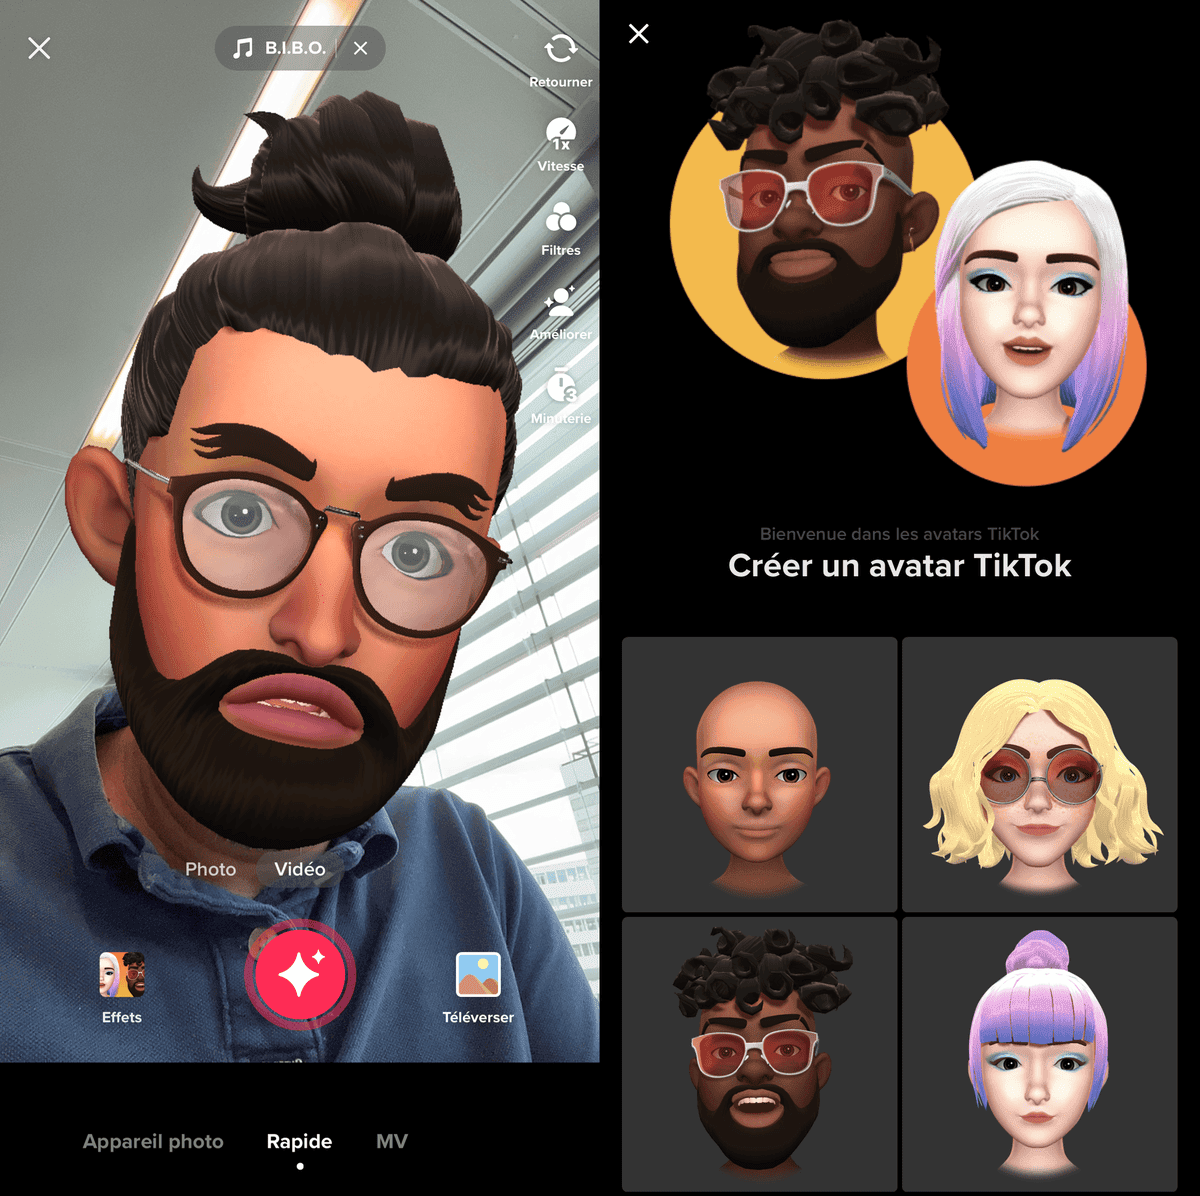 The new feature allows you to display yourself as an avatar.